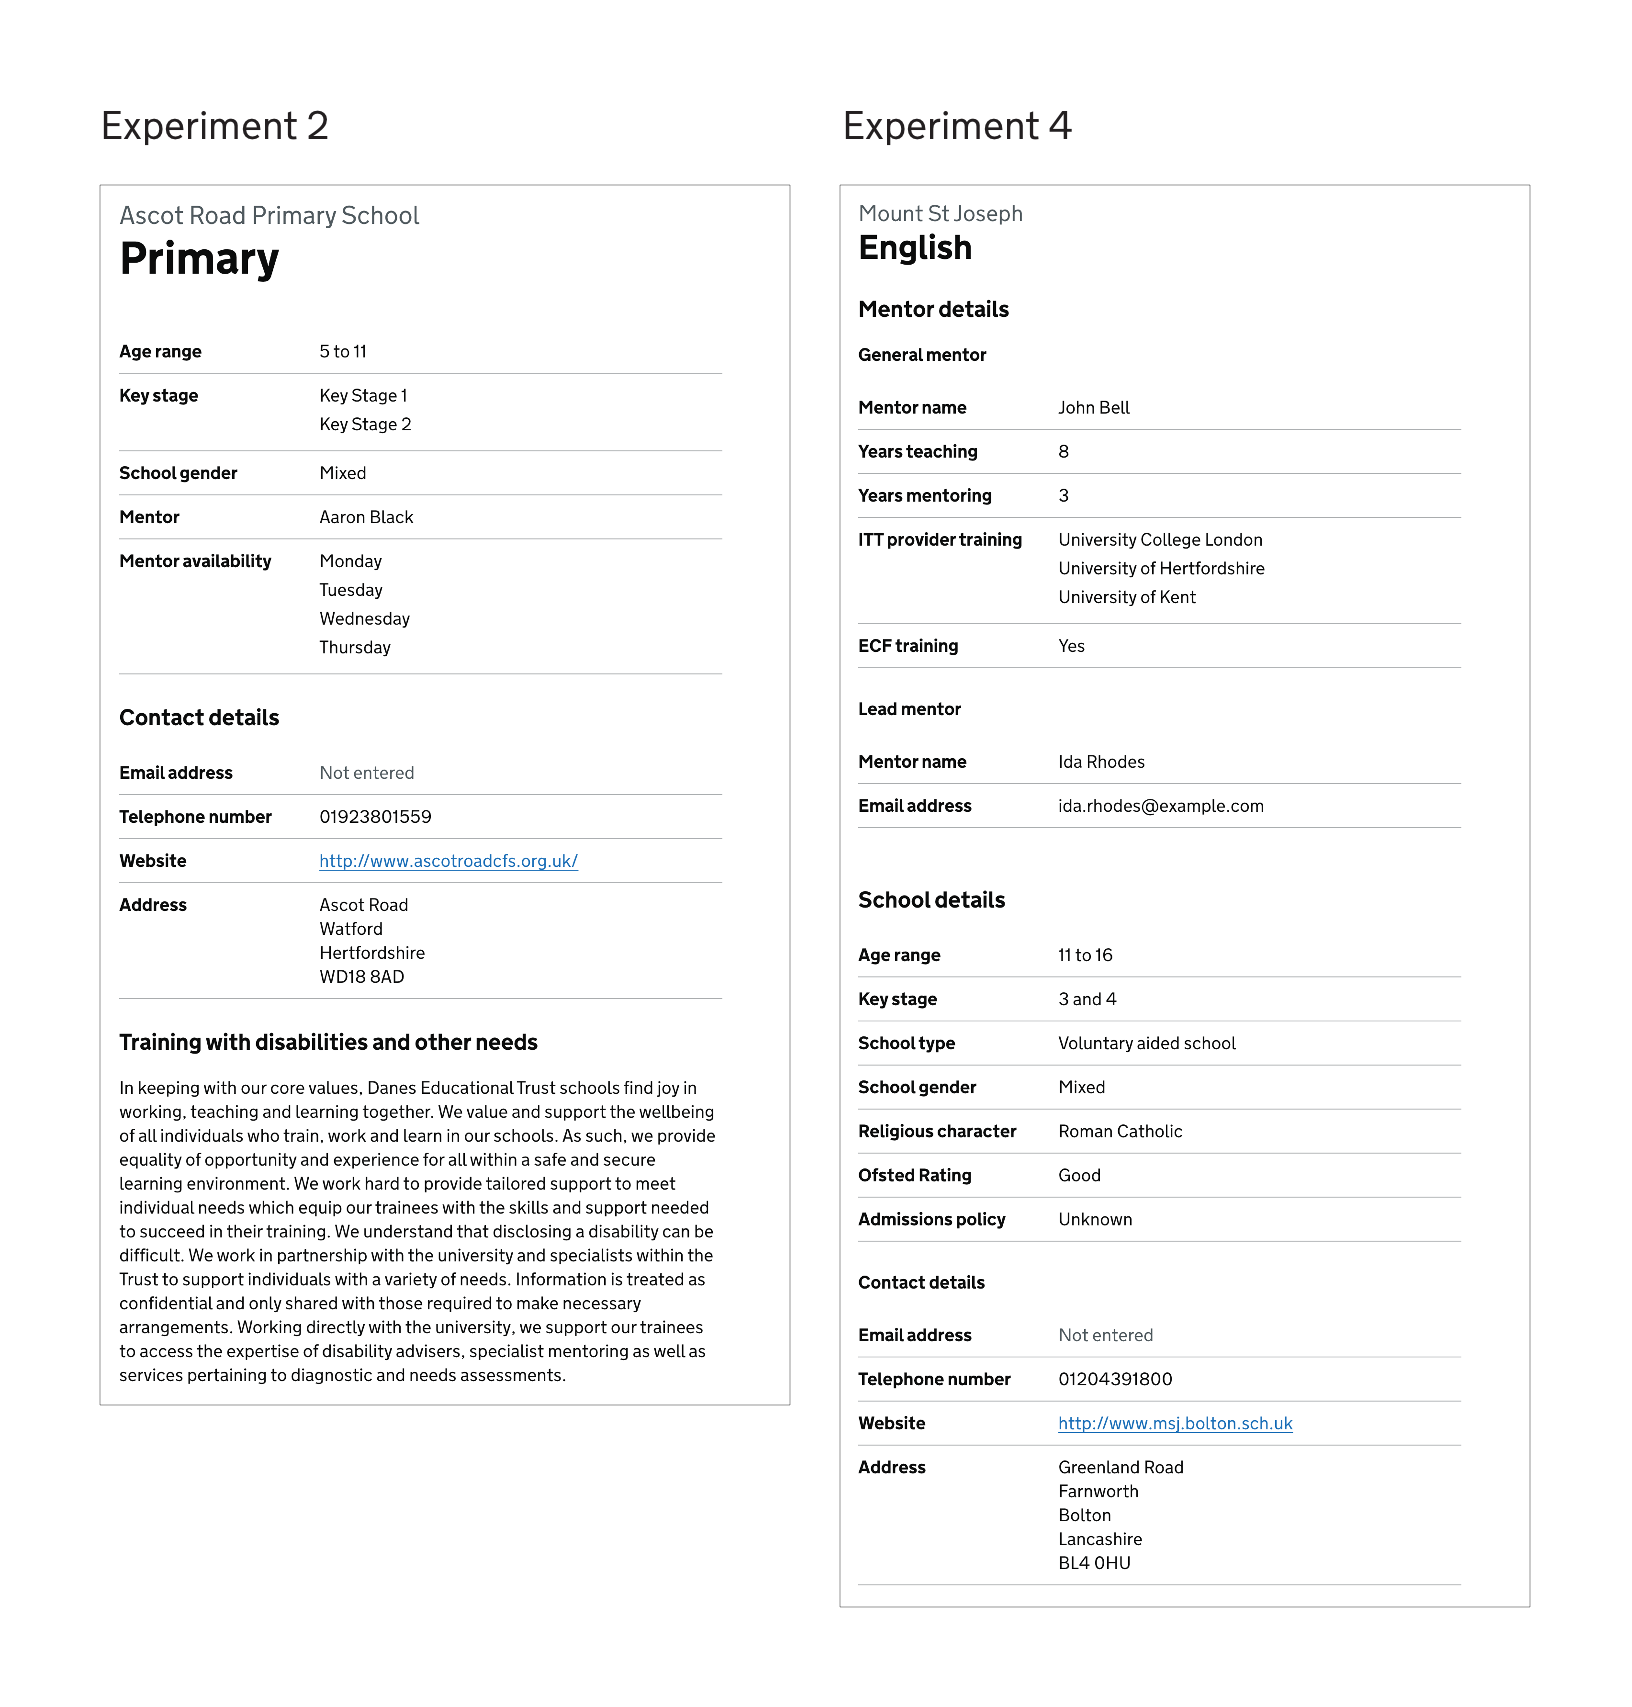 Image showing the change in the details page content and layout between experiments 2 and 4